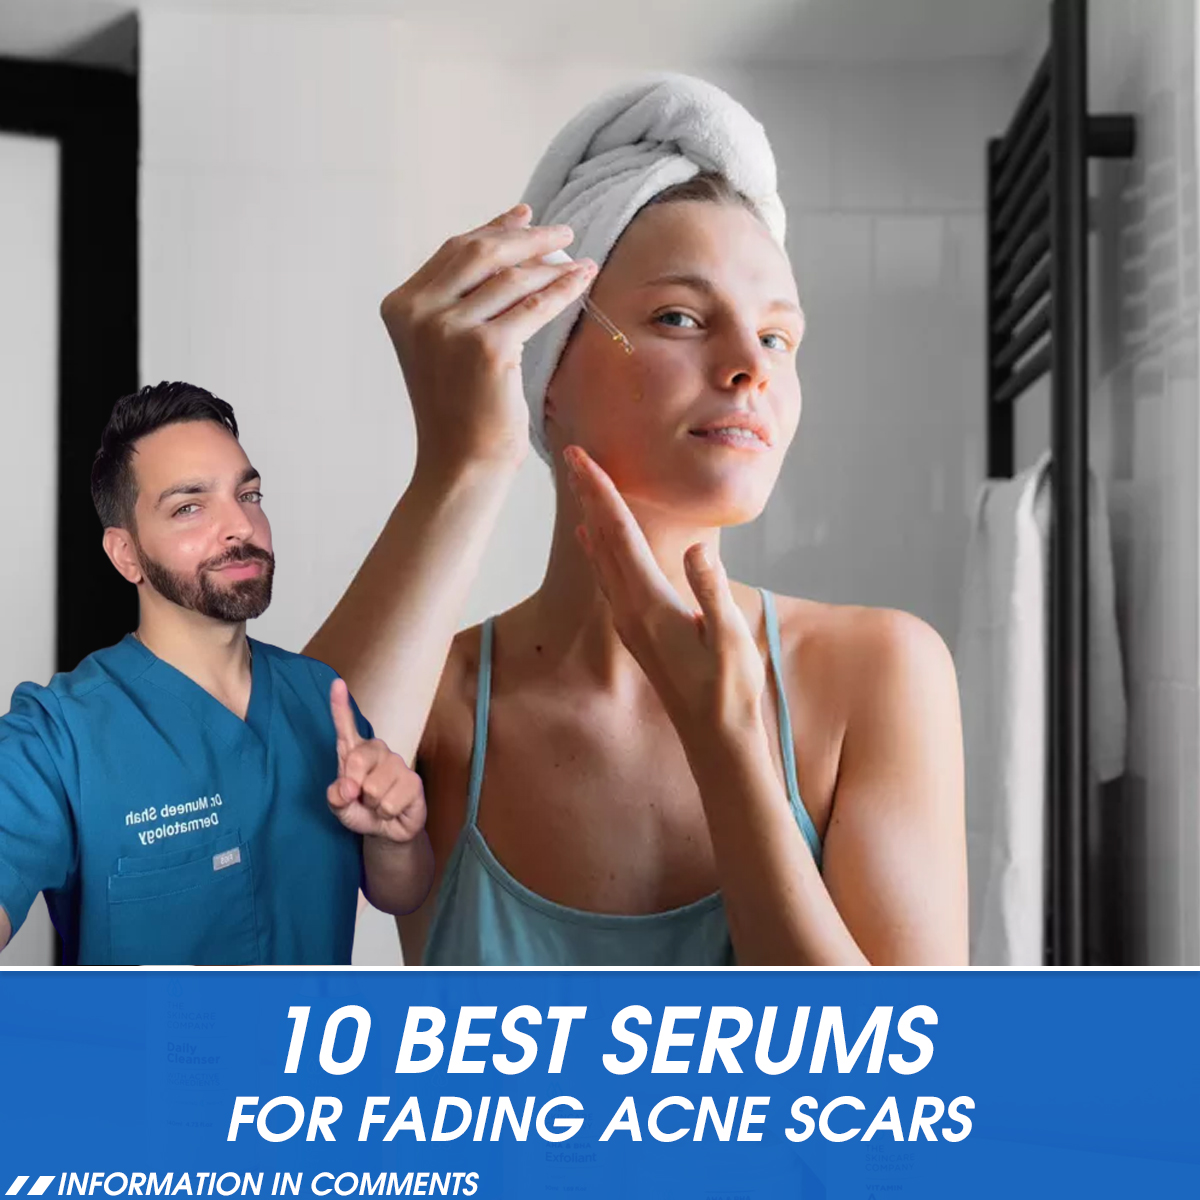 10 Best Serums for Fading Acne Scars